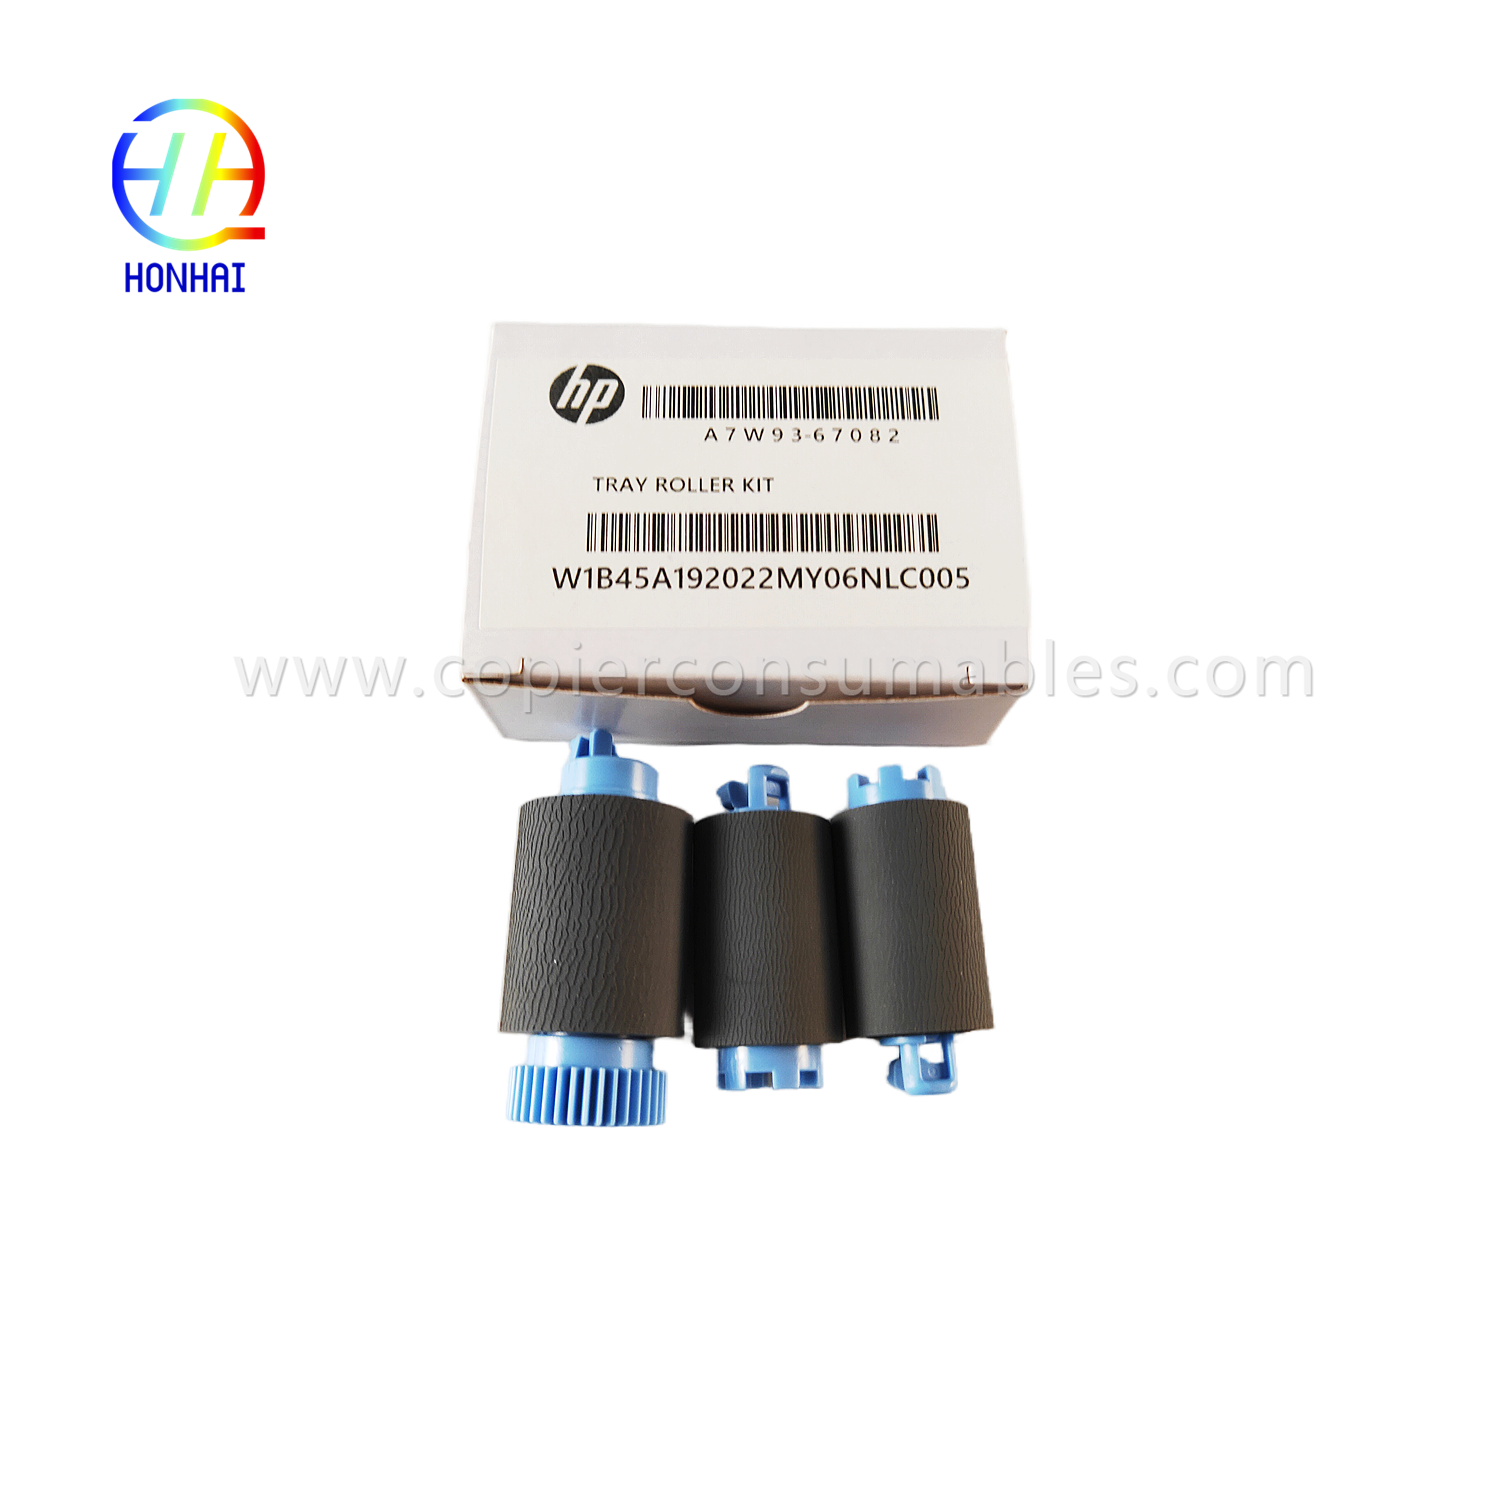 https://www.copierconsumables.com/tray-2-5-pickup-feed-separation-roller-set-for-hp-a7w93-67082-mfp-785f-780dn-e77650z-e77660z-e77650dn-e77660dn-p77740dn- p77750z-p77760z-p75050dn-p75050dw-उत्पाद/